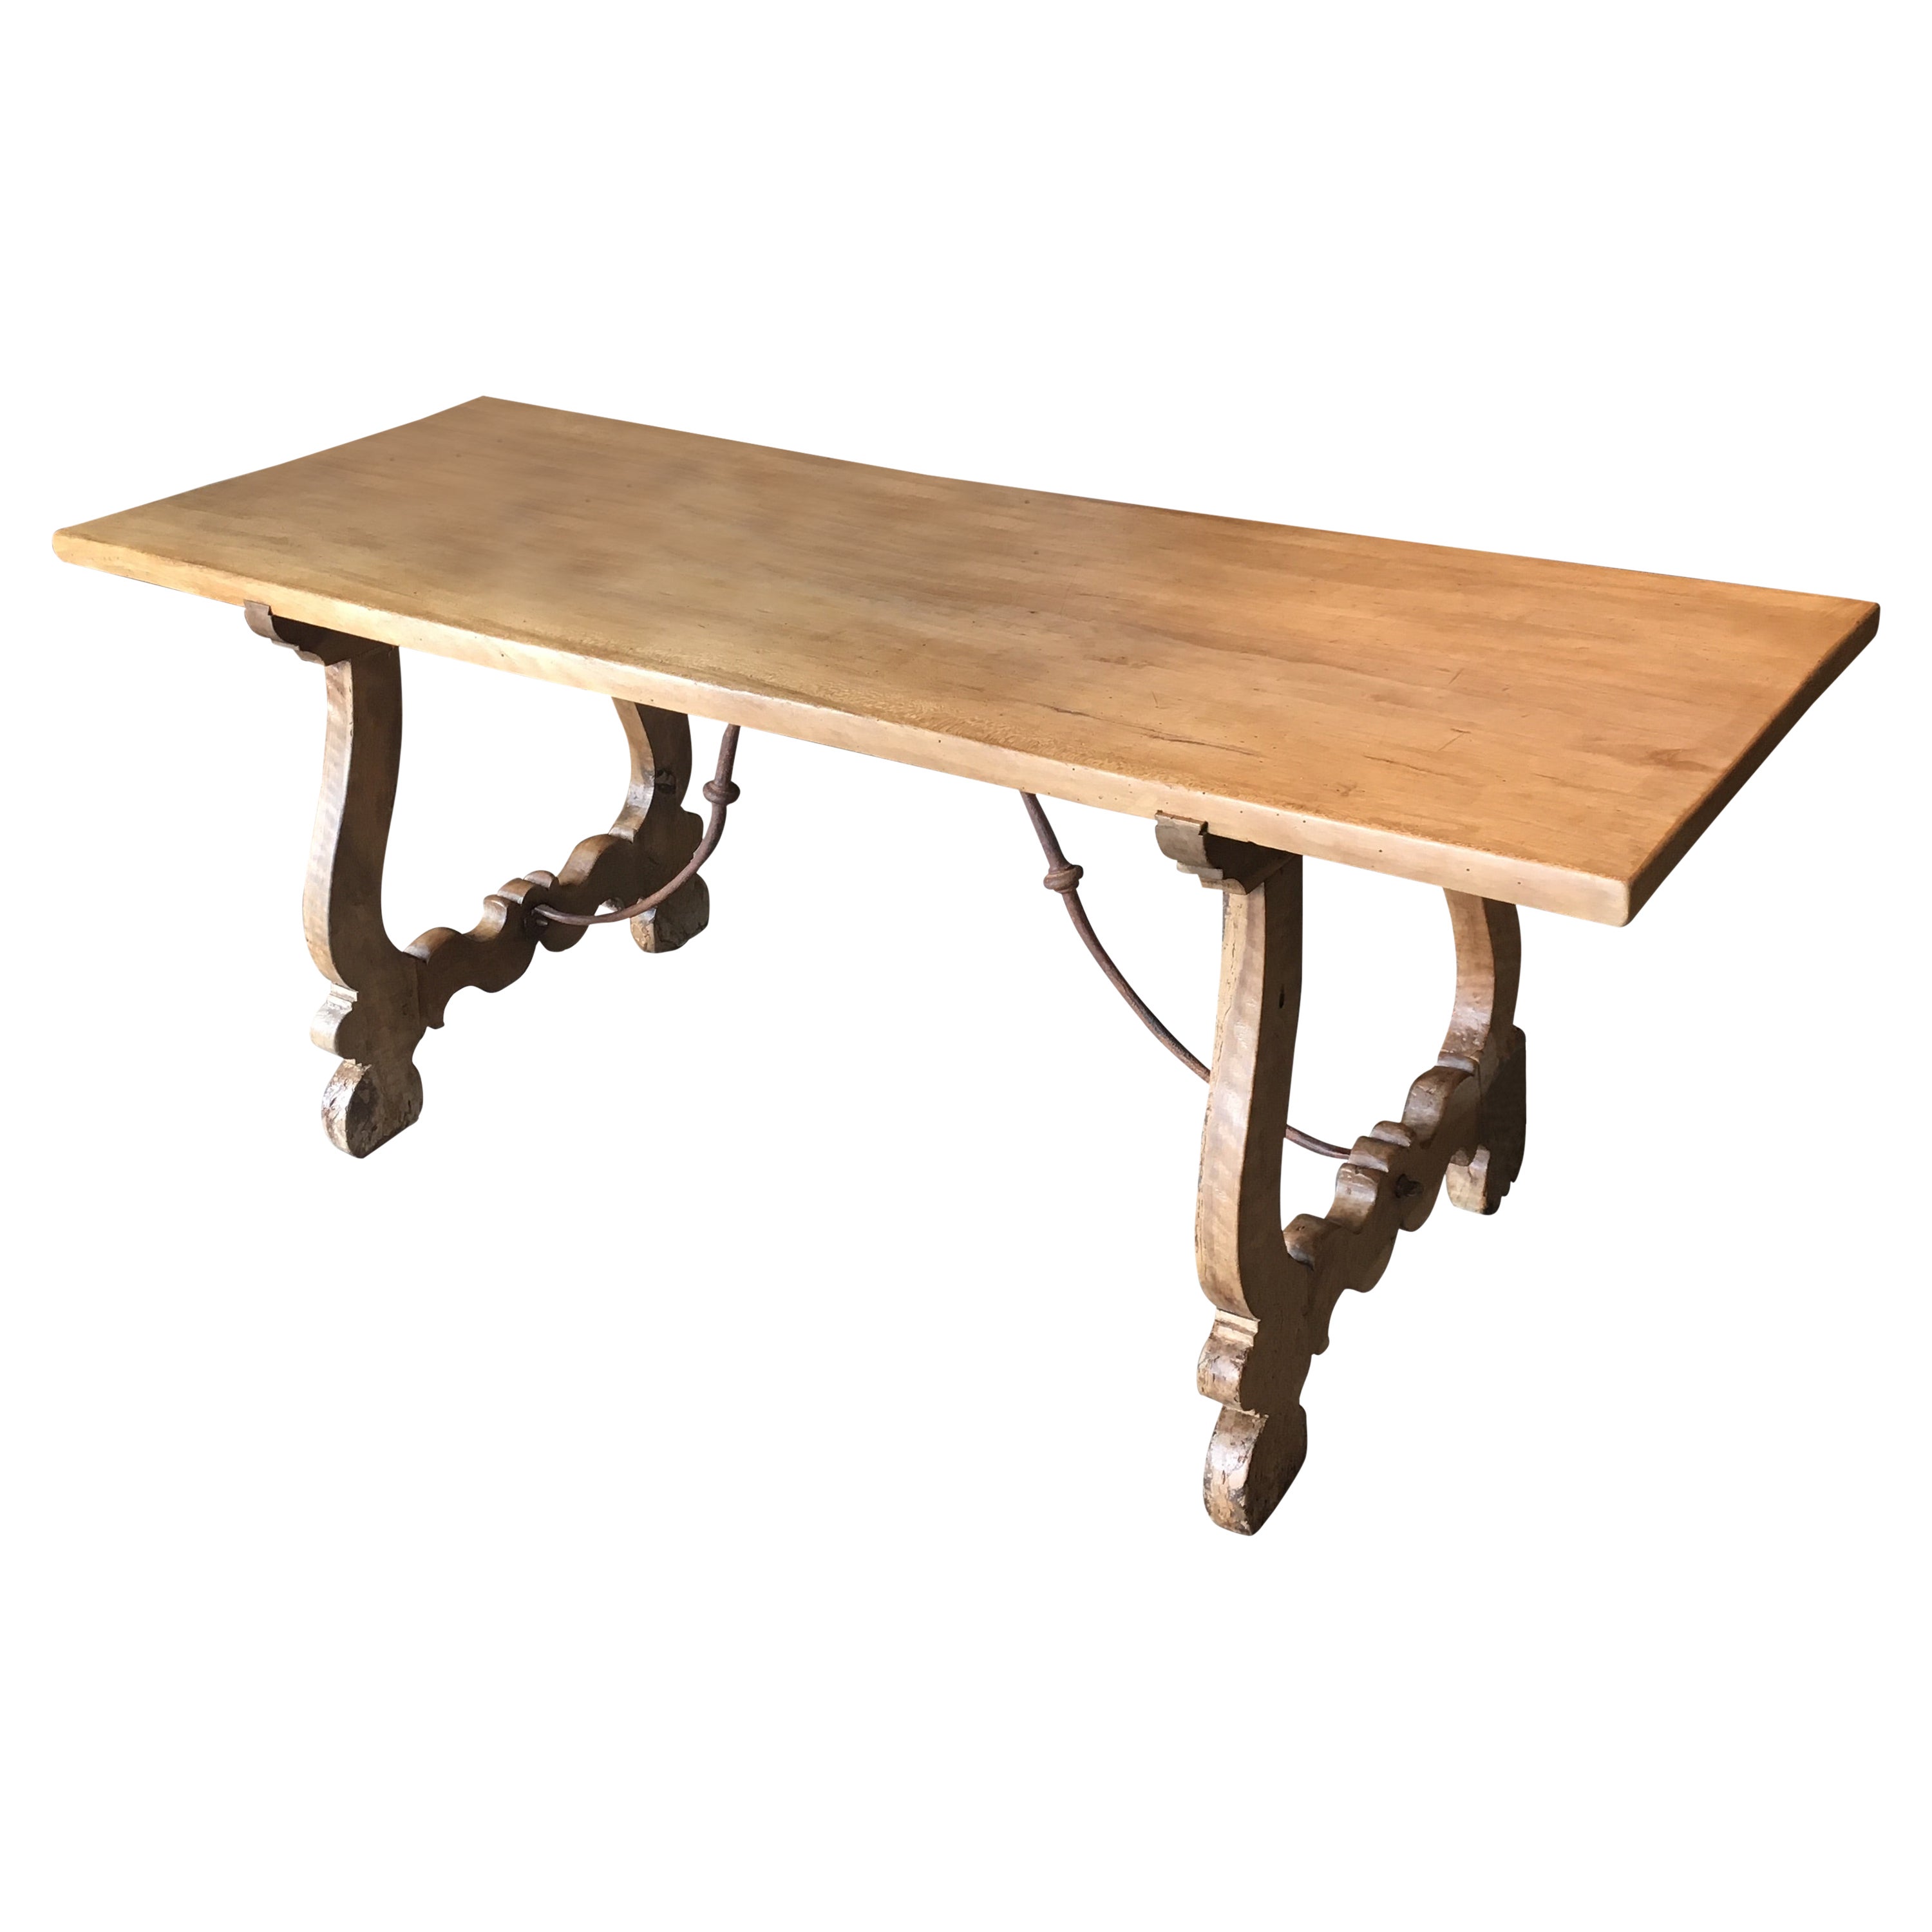 Italian Walnut Farmhouse Table style with Forged Iron in reproduction sizes